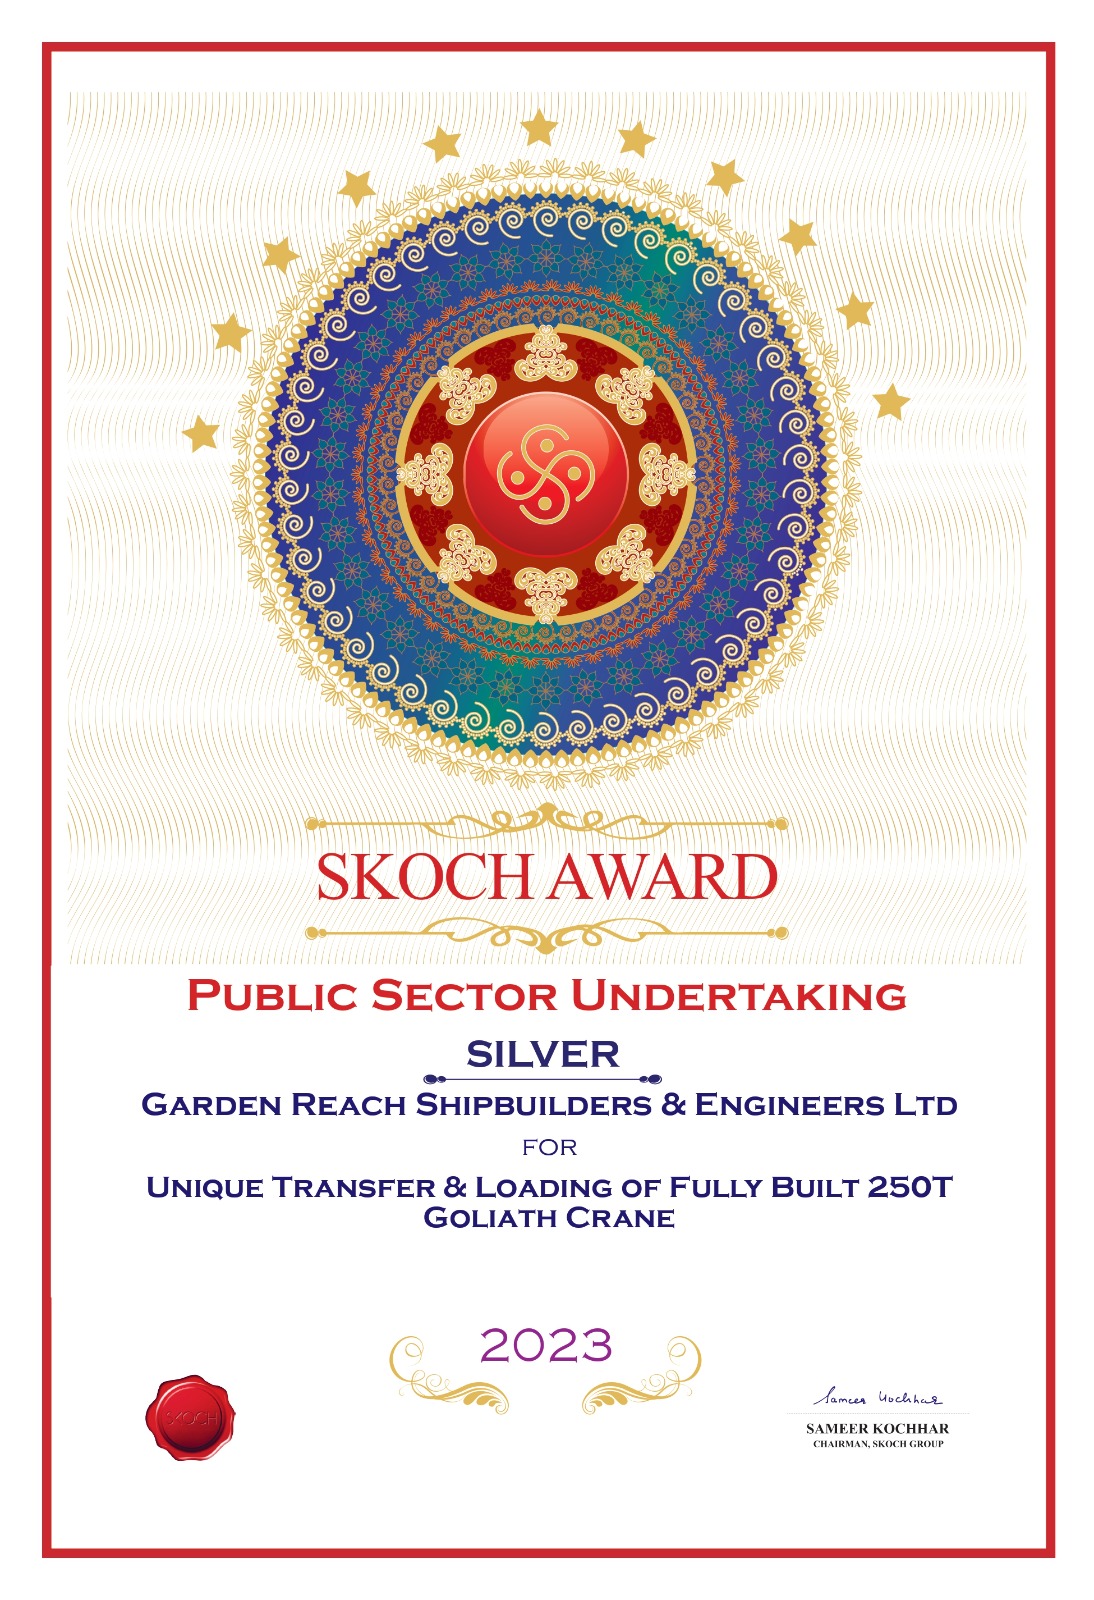 Image 2 - GRSE received prestigious 91st SKOCH Awards for the project Unique Transfer & Loading of fully built 250T Goliath Crane on 04 May 23